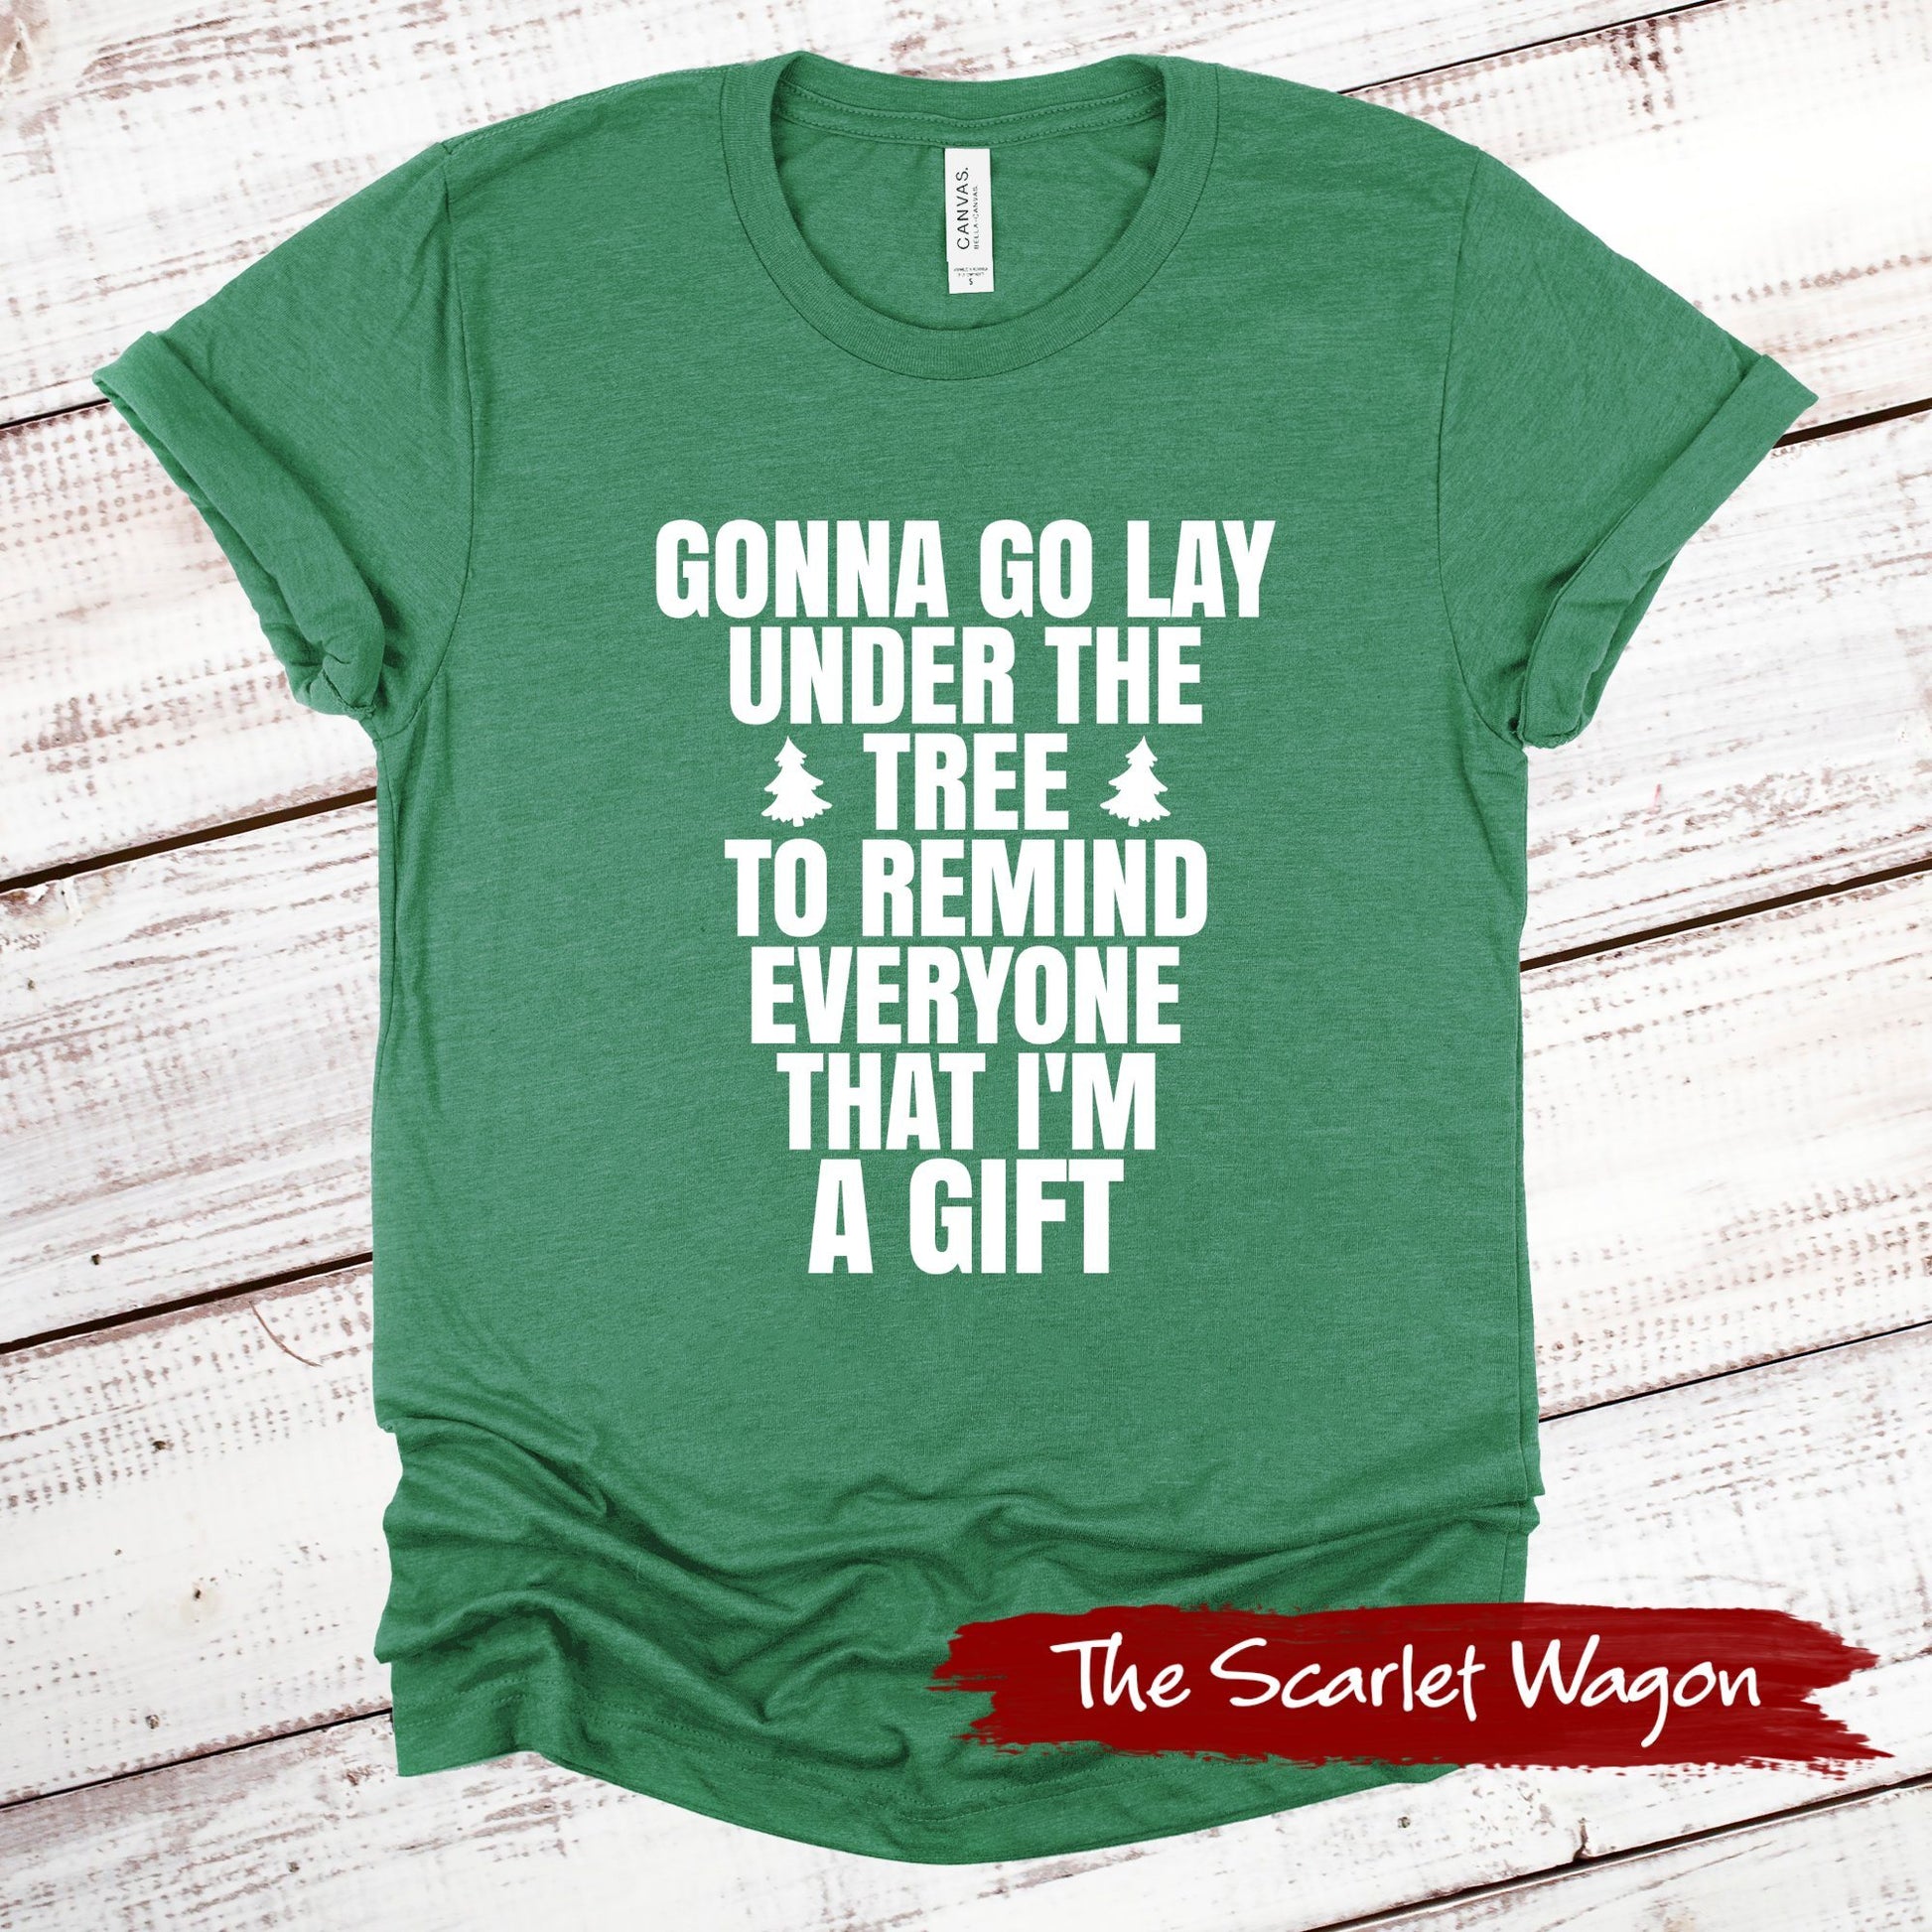 Gonna Go Lay Under the Tree Christmas Shirt Scarlet Wagon Heather Green XS 